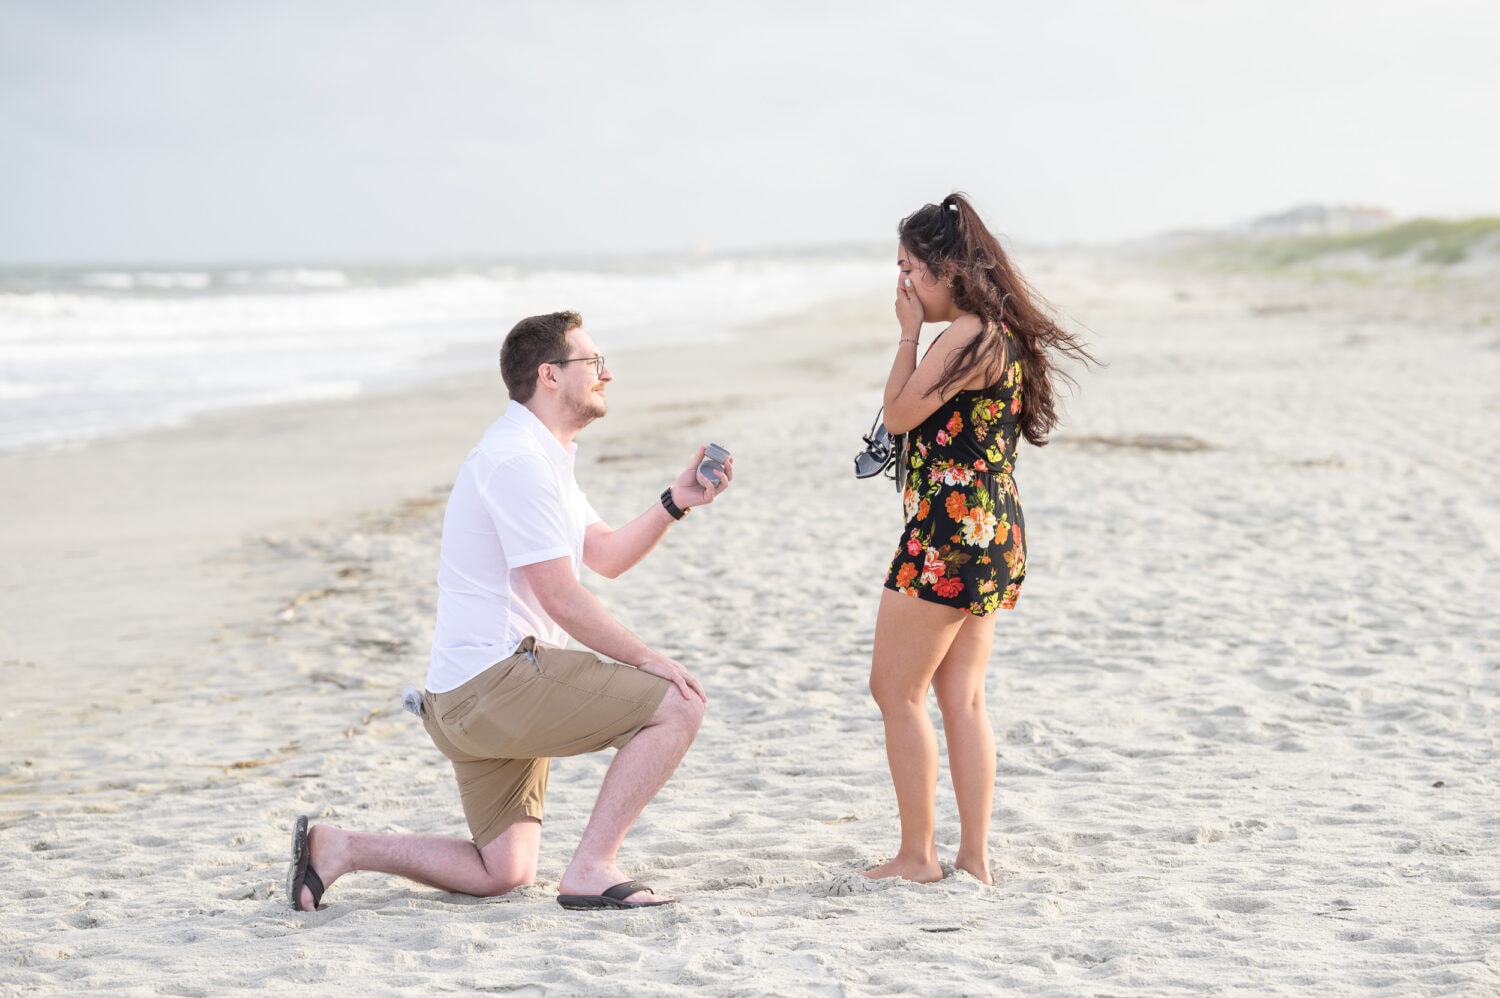 Big emotions during the surprise proposal - Huntington Beach State Park - Myrtle Beach